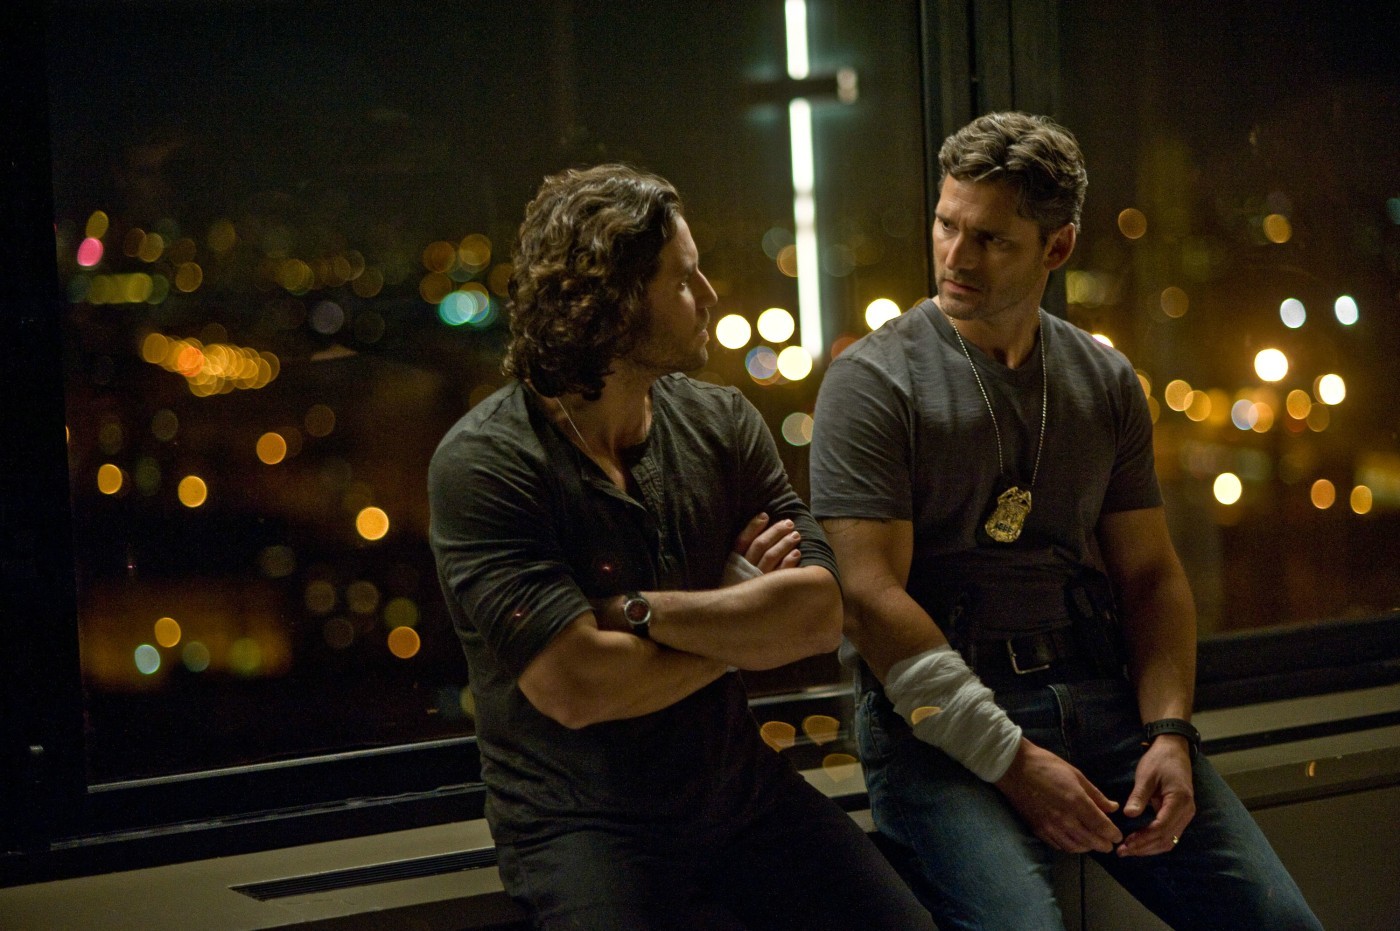 Edgar Ramirez stars as Mendoza and Eric Bana stars as Ralph Sarchie in Screen Gems' Deliver Us from Evil (2014)